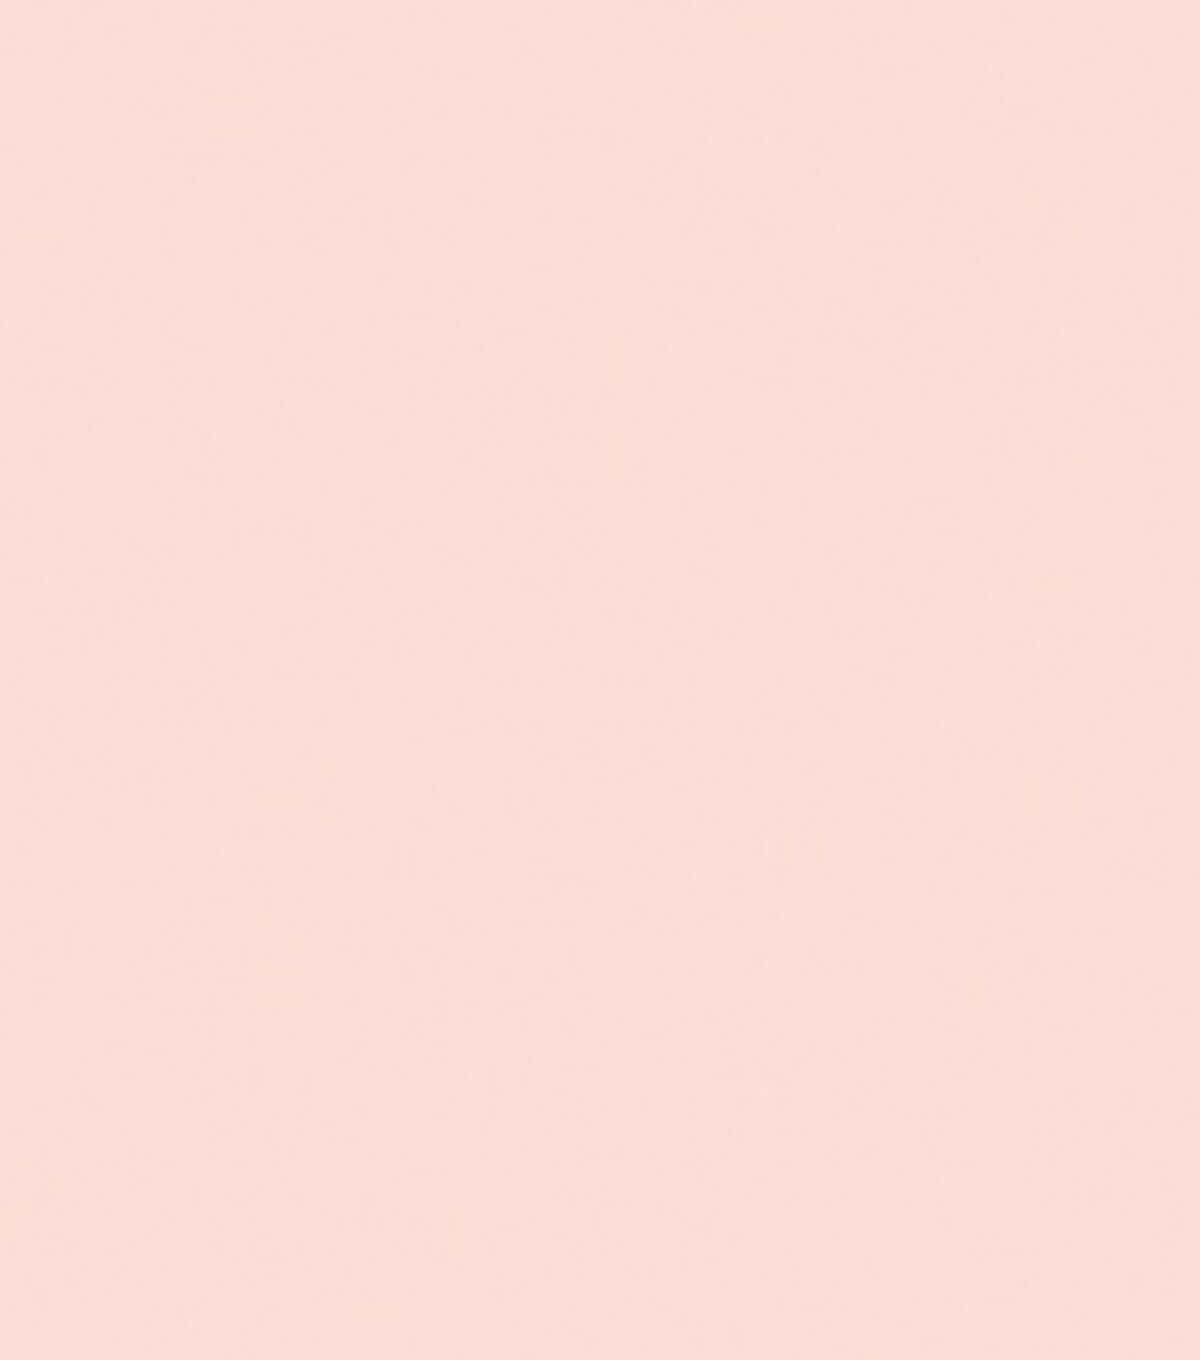 A Pink Background With A Small Plane Flying Over It